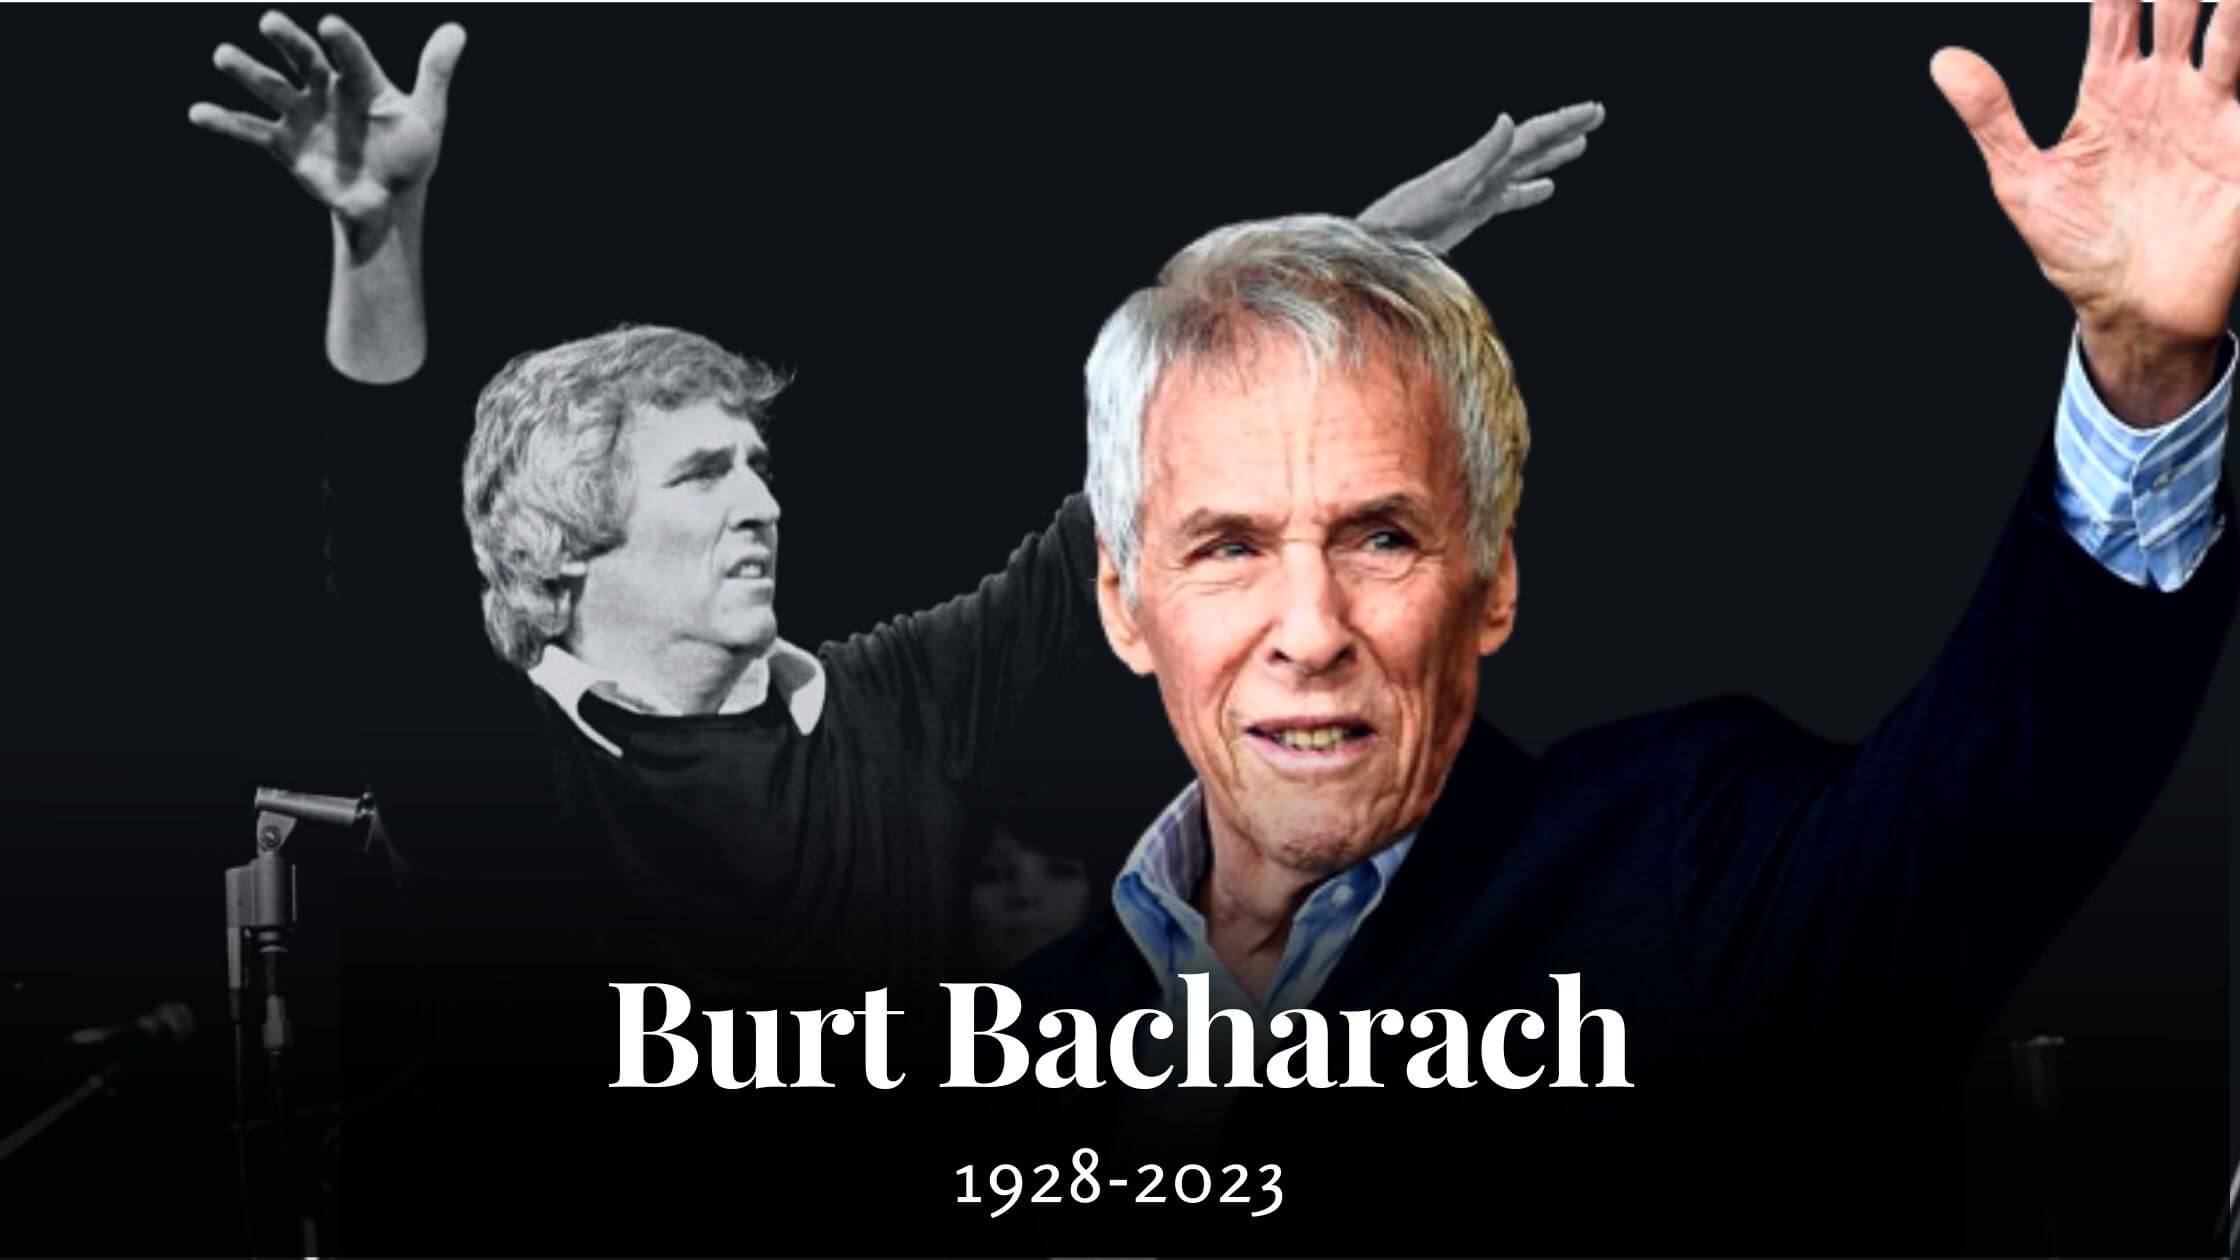 Burt Bacharach The Virtuoso Of Music Cause Of Death, Net Worth, And Personal Life